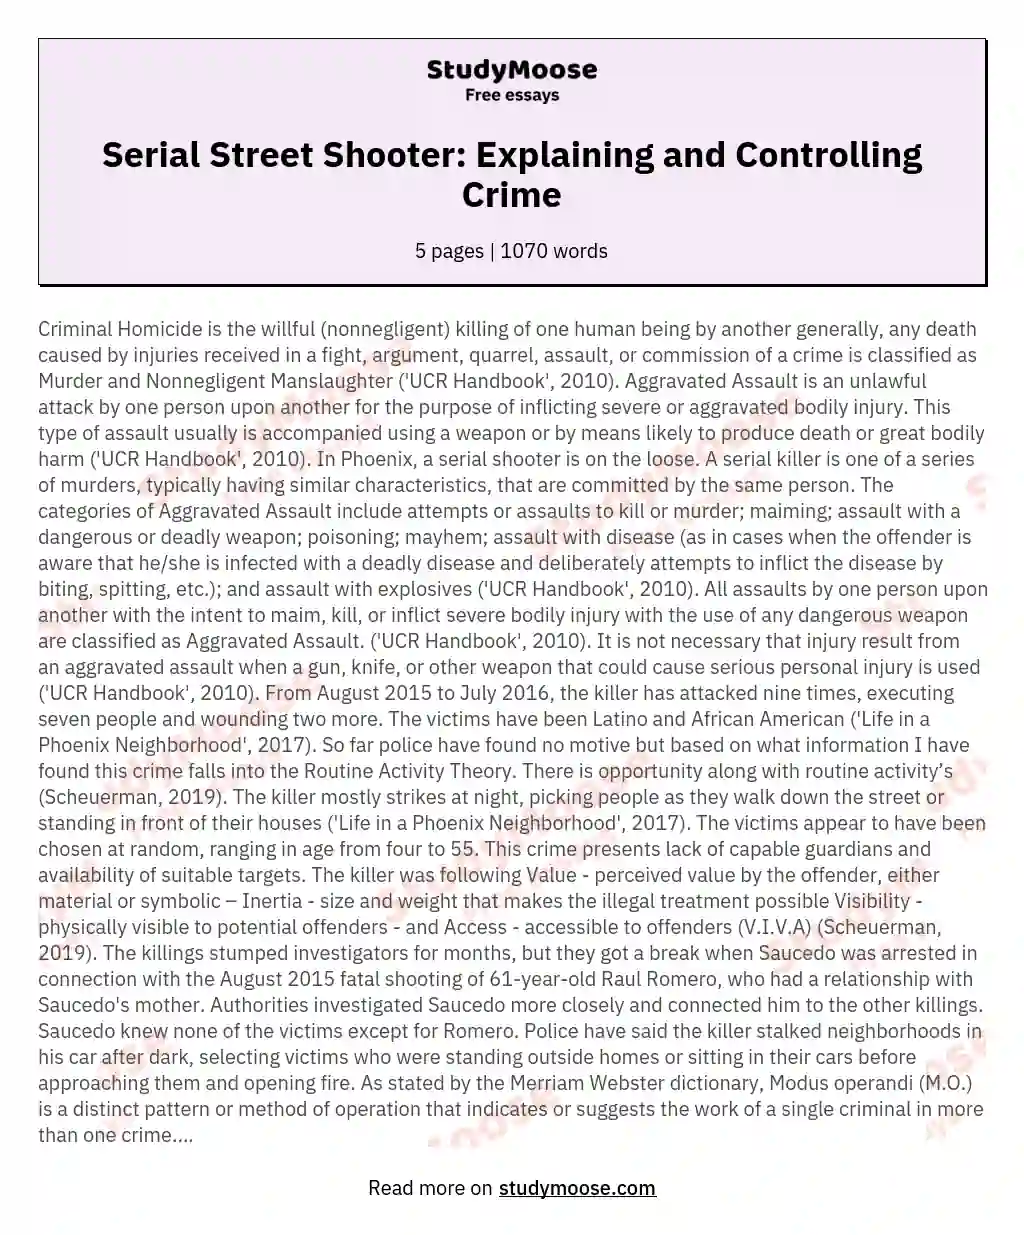 Serial Street Shooter: Explaining and Controlling Crime essay